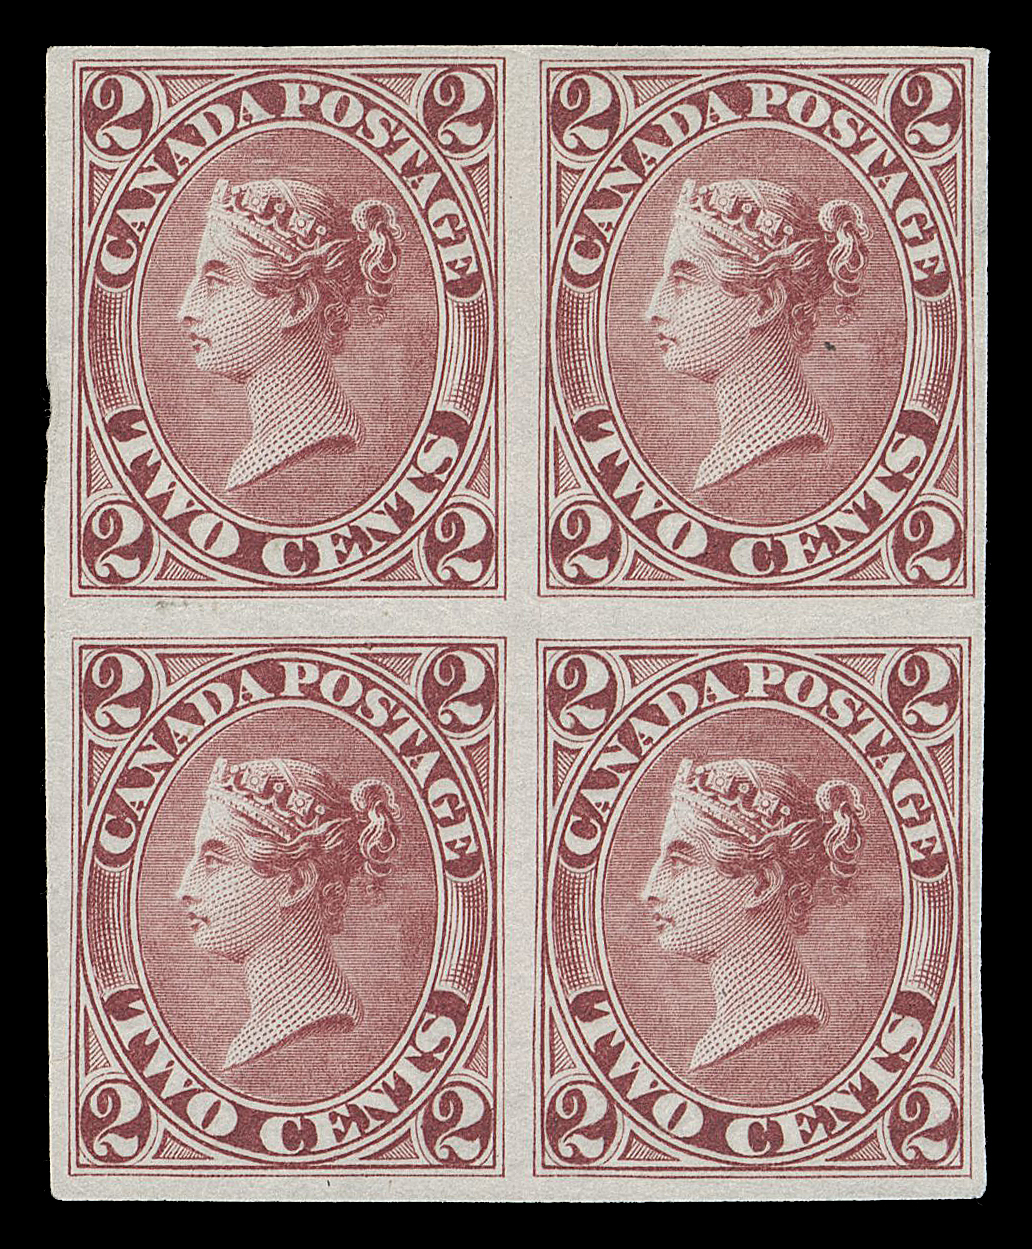 TWO CENTS  20TCi,An attractive plate proof block printed in claret, near issued colour, on india paper, VF